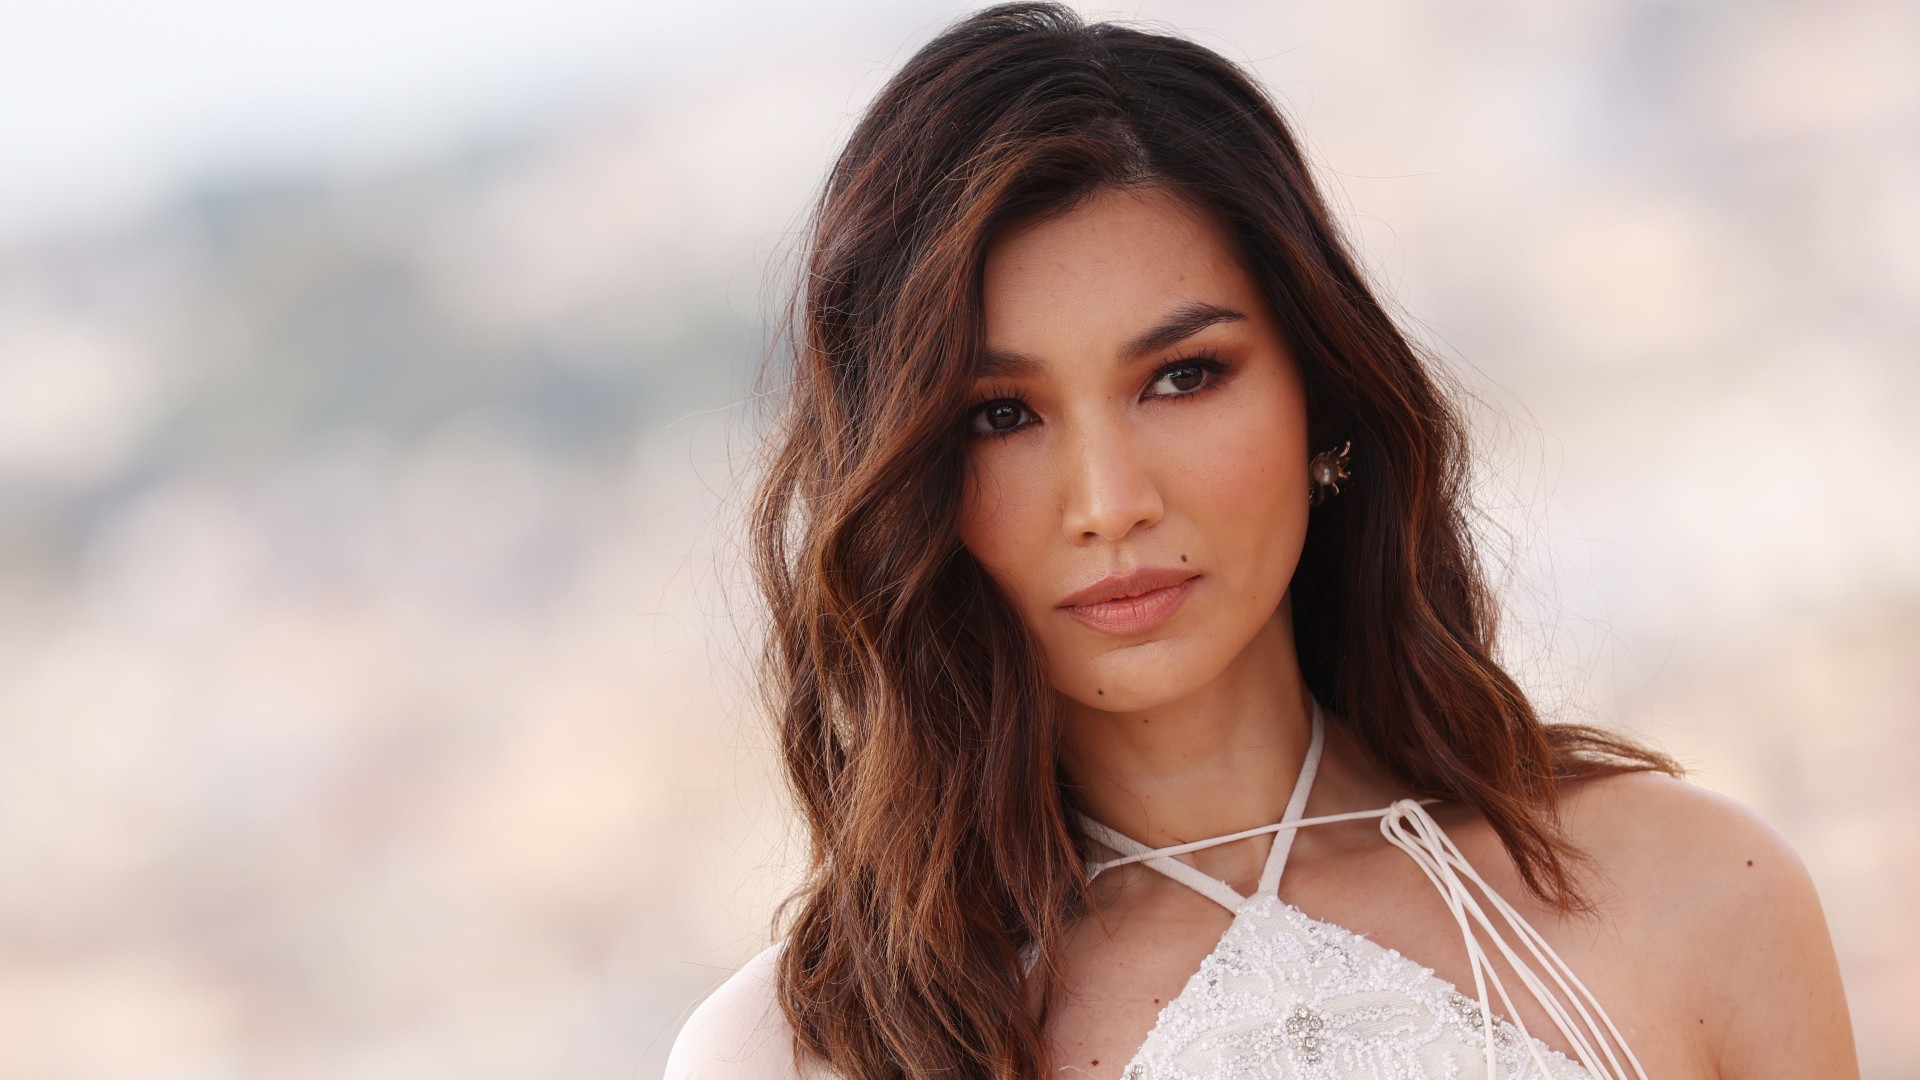 10 Things You Never Knew About 'Eternals' Star Gemma Chan